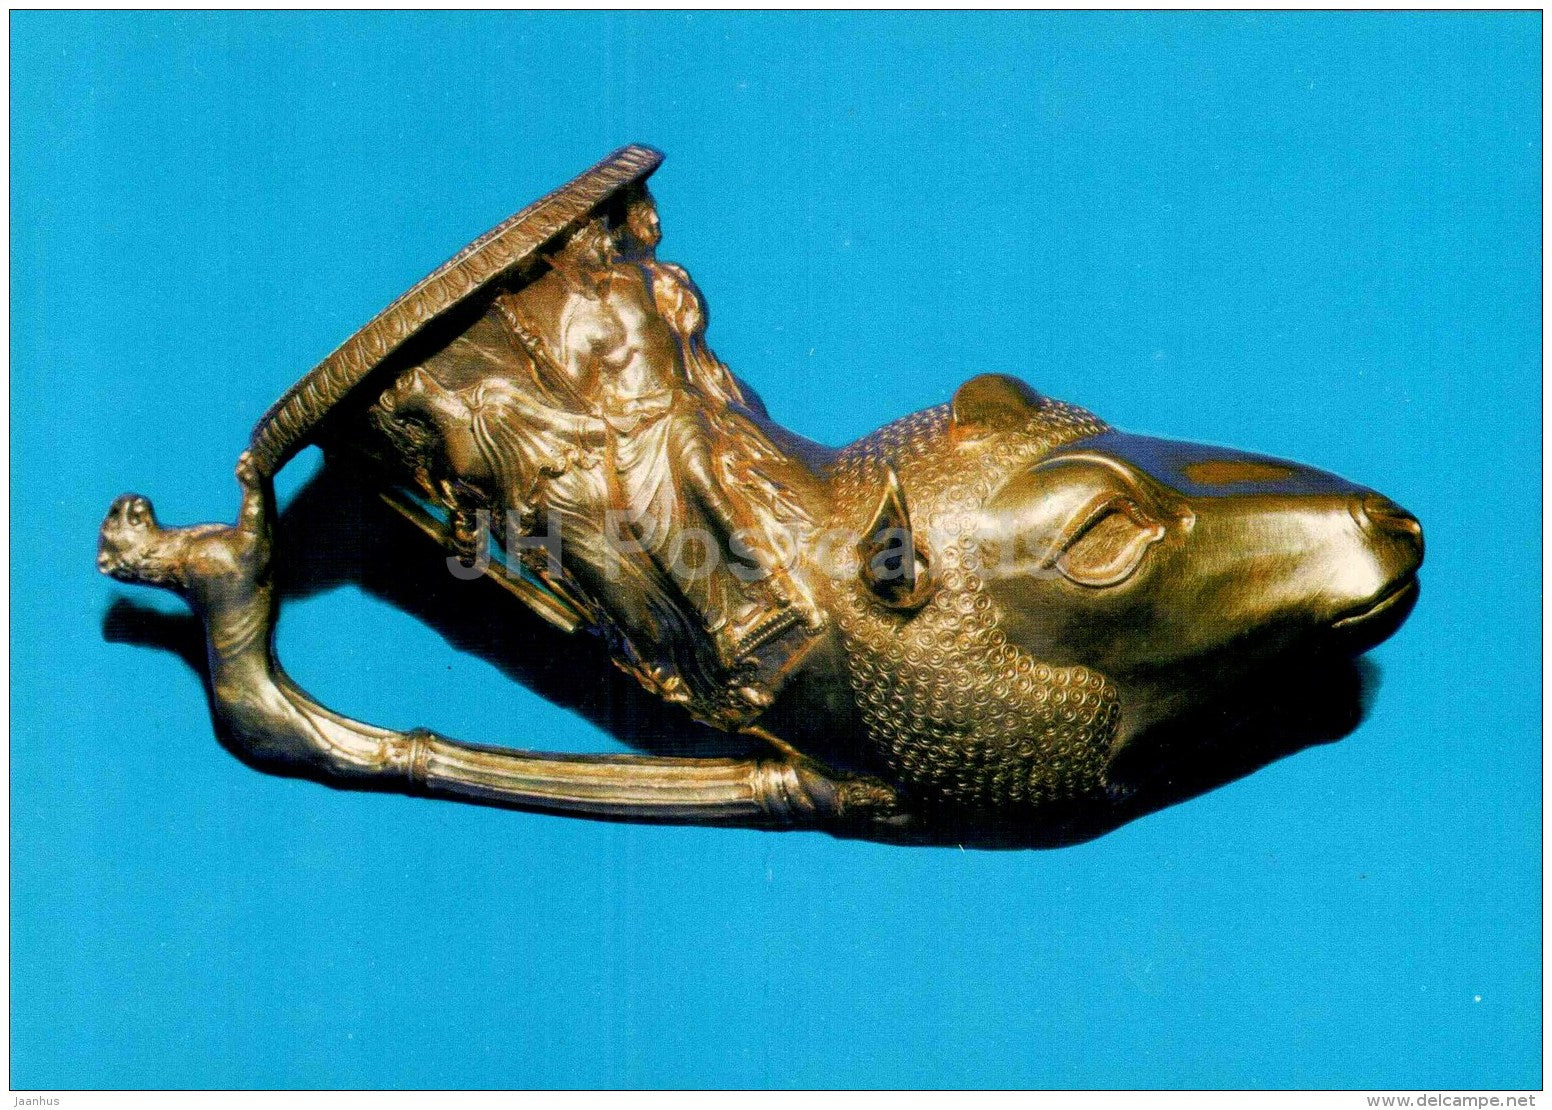 The Panagyurishte Gold Treasure - The Third Rhyton - Art in Bulgaria from antiquity to today - Bulgaria - unused - JH Postcards